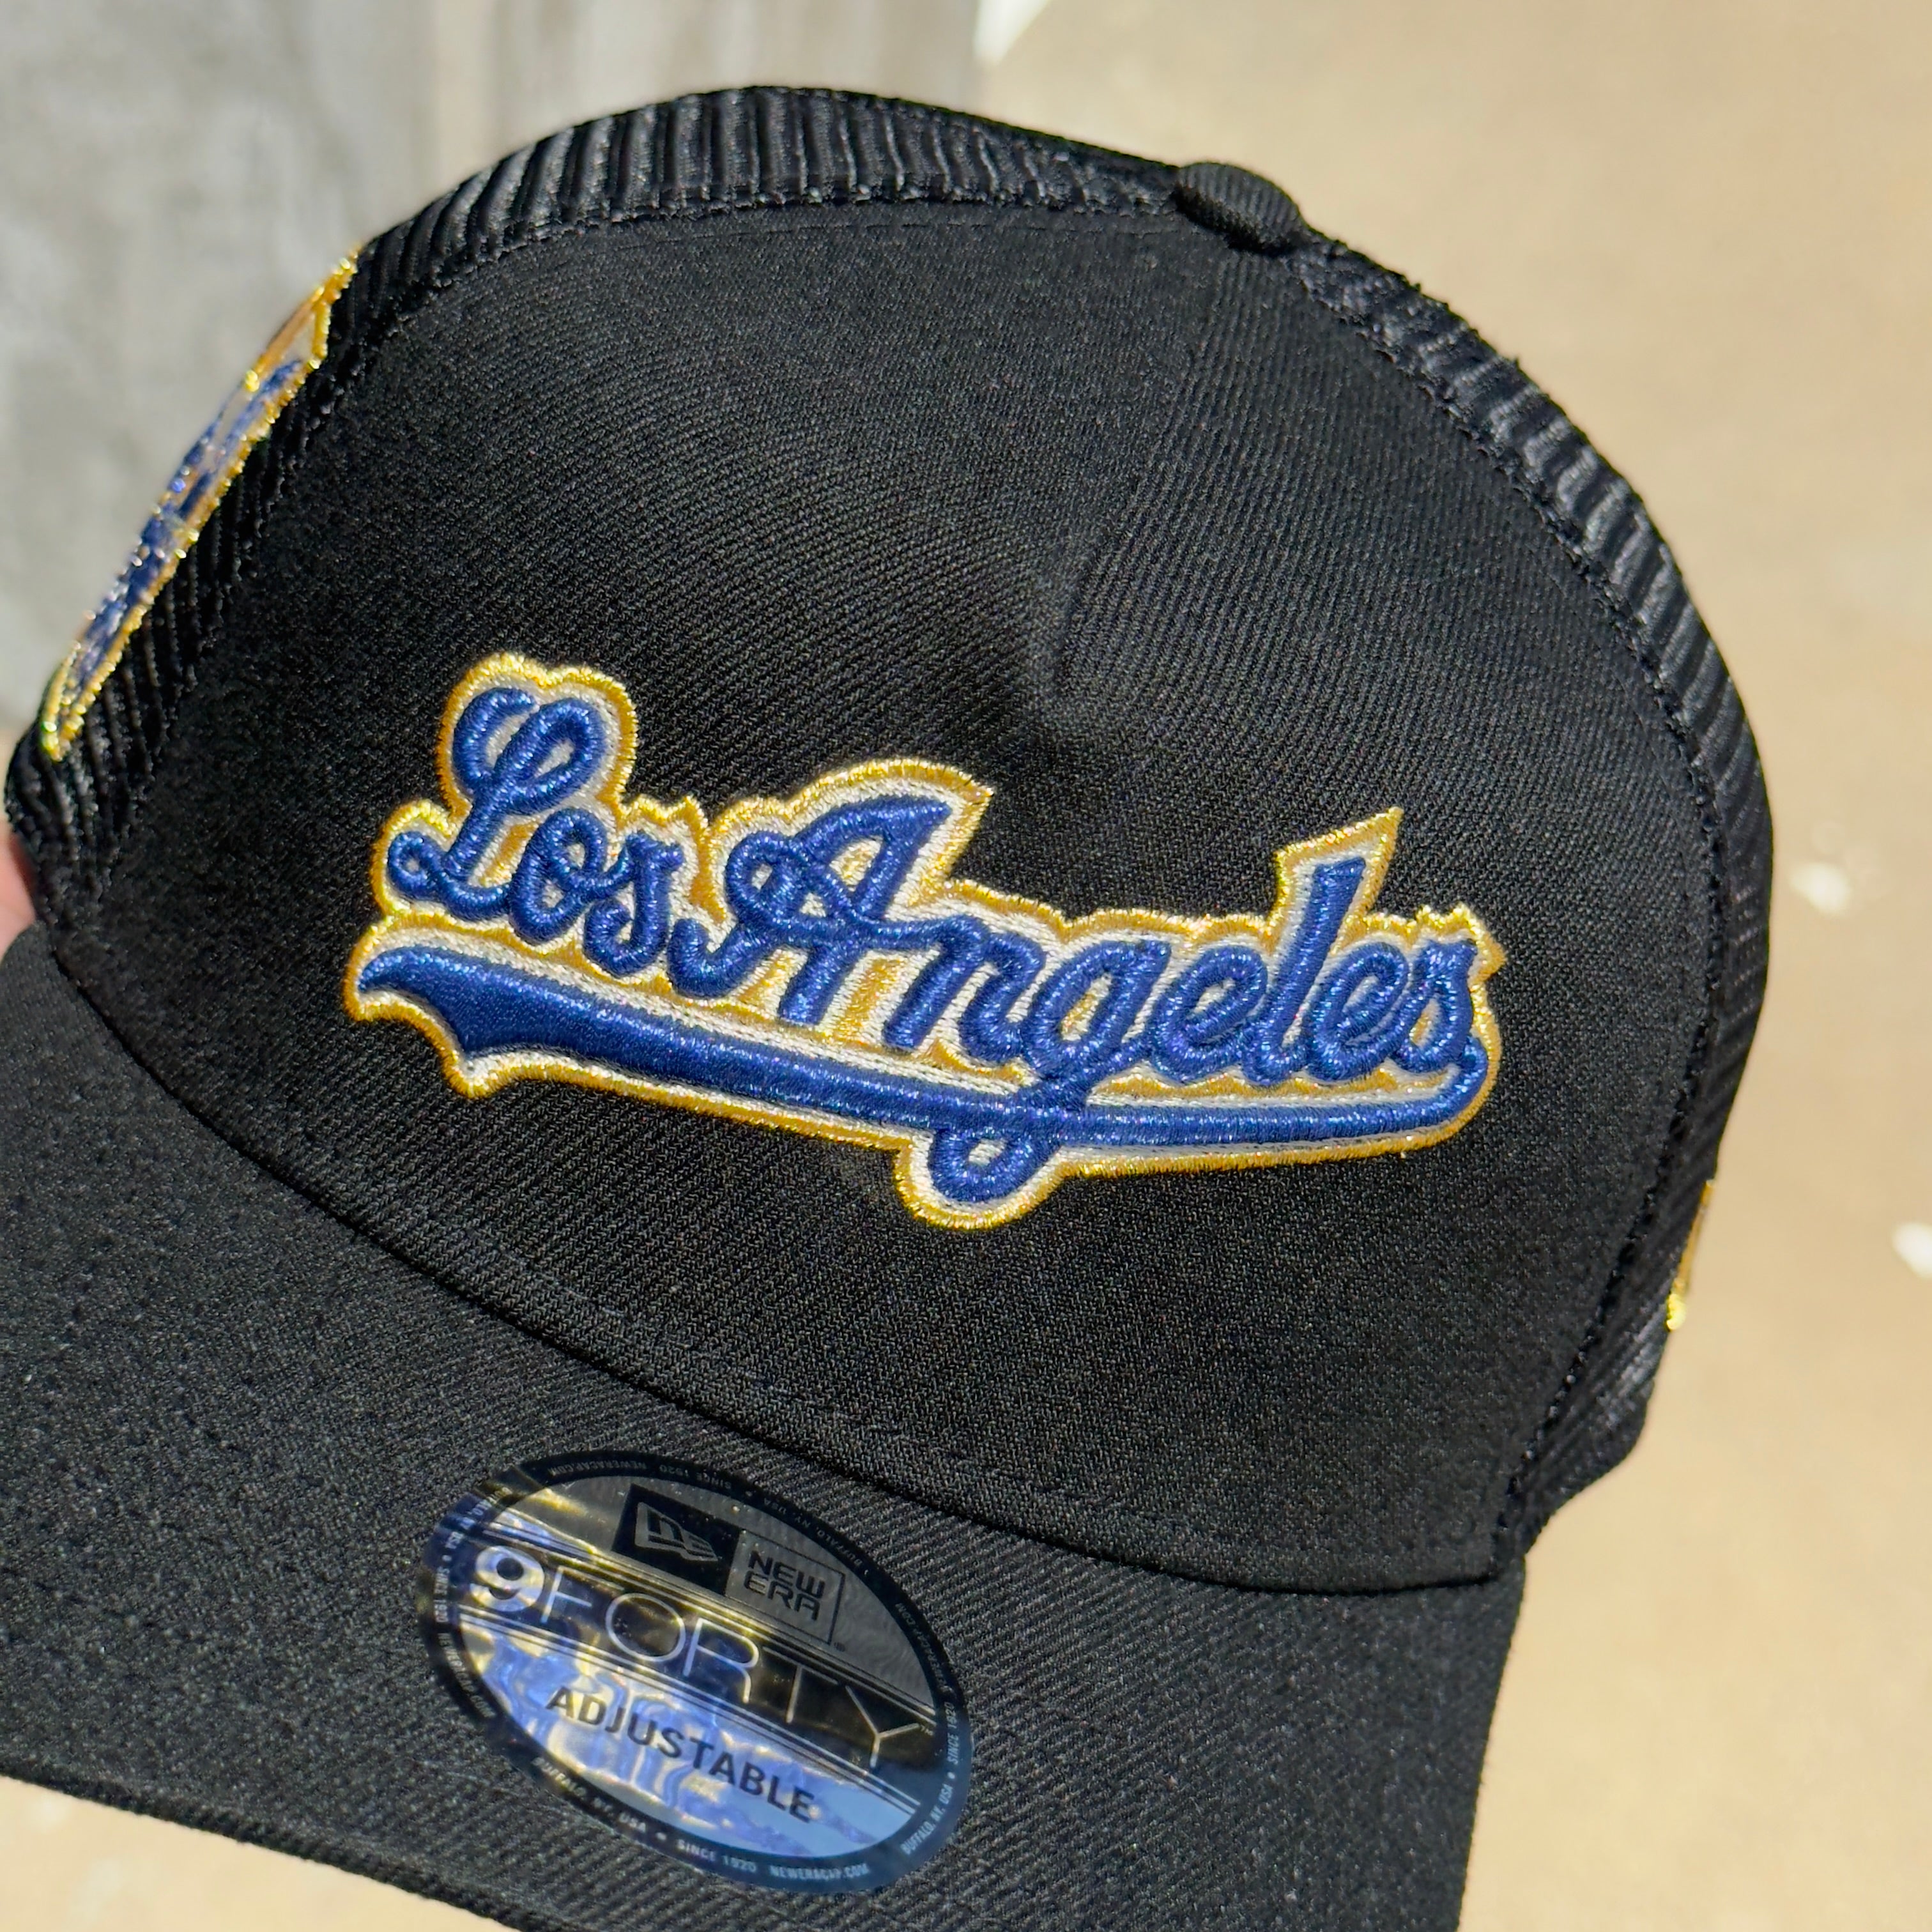 NEW Black Los Angeles Dodgers 60th Anniversary Trucker New Era 9Forty Adjustable One Size A-Frame